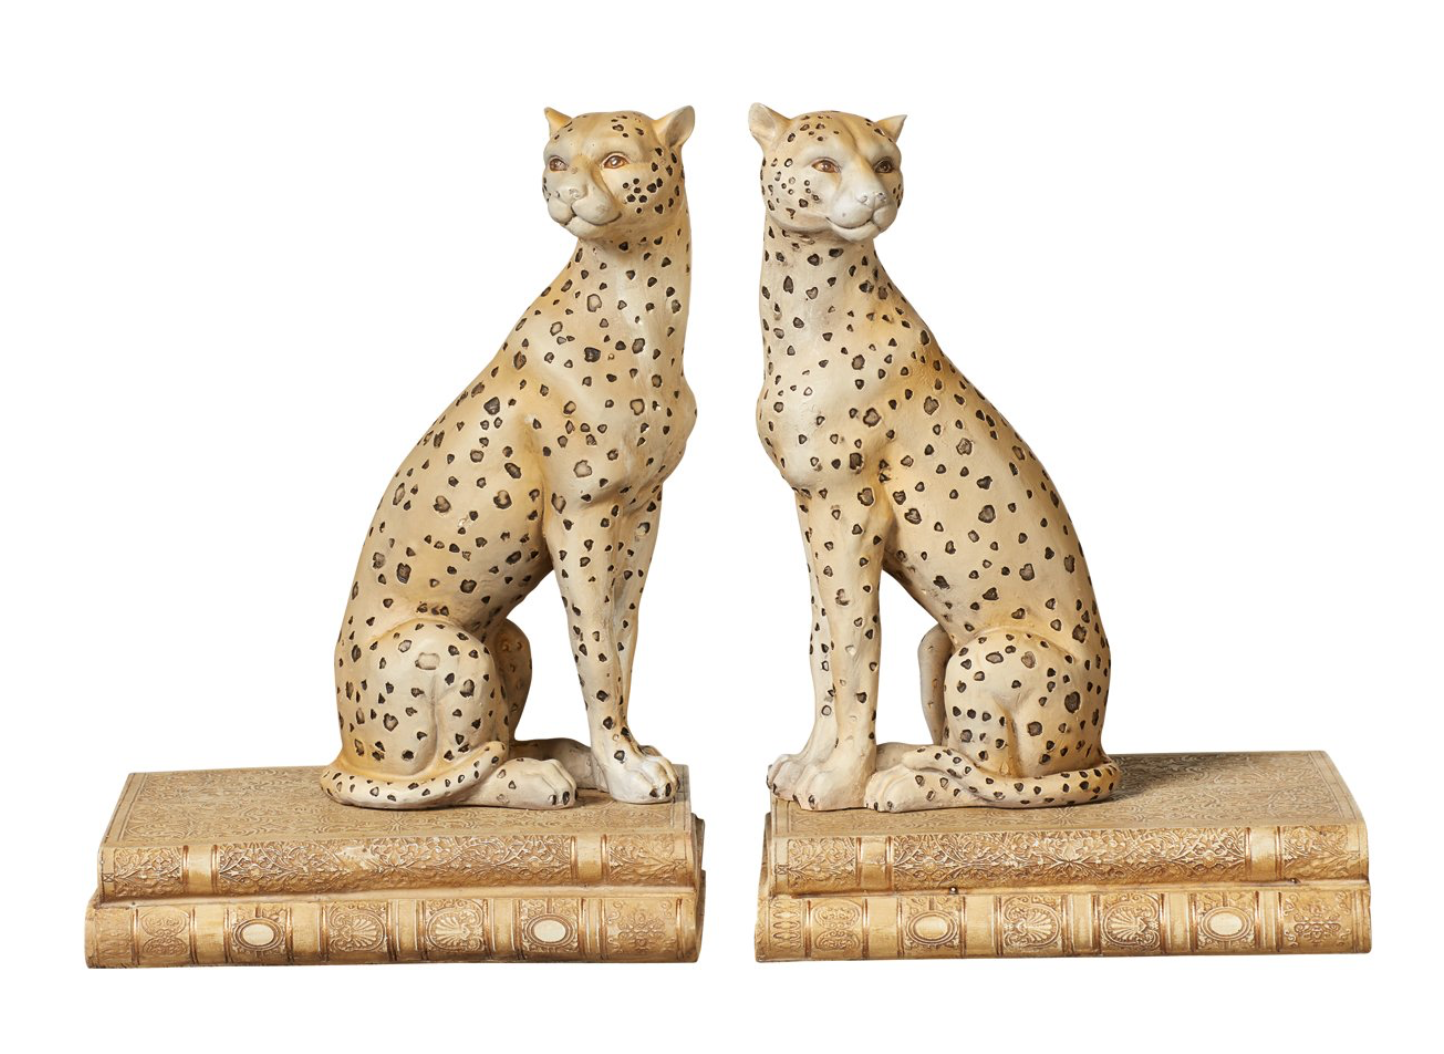 Leopard Bookends - click here to shop